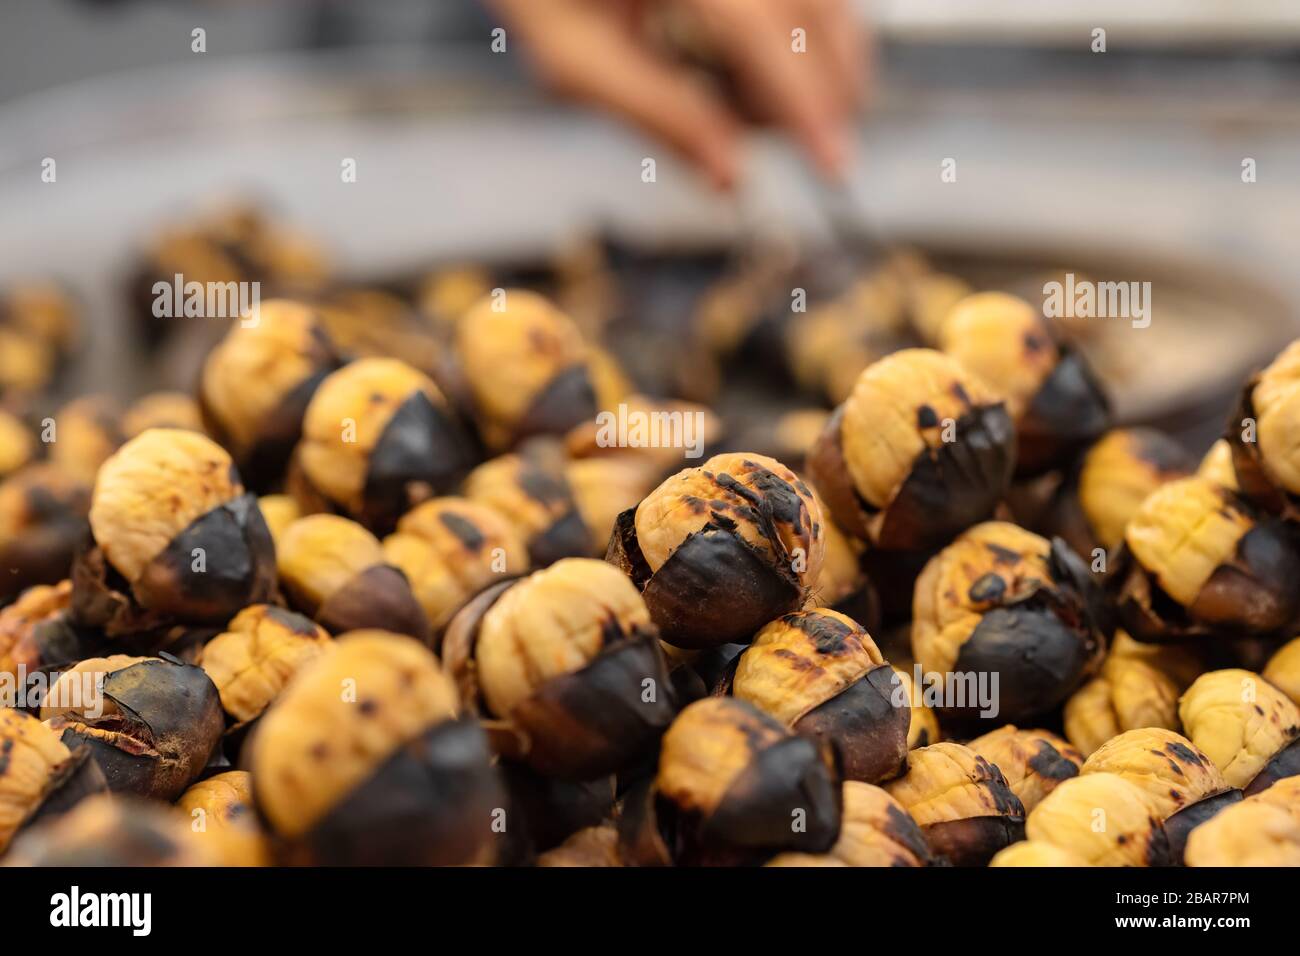 Closeup of street food of roasted chestnuts in Turkey Stock Photo